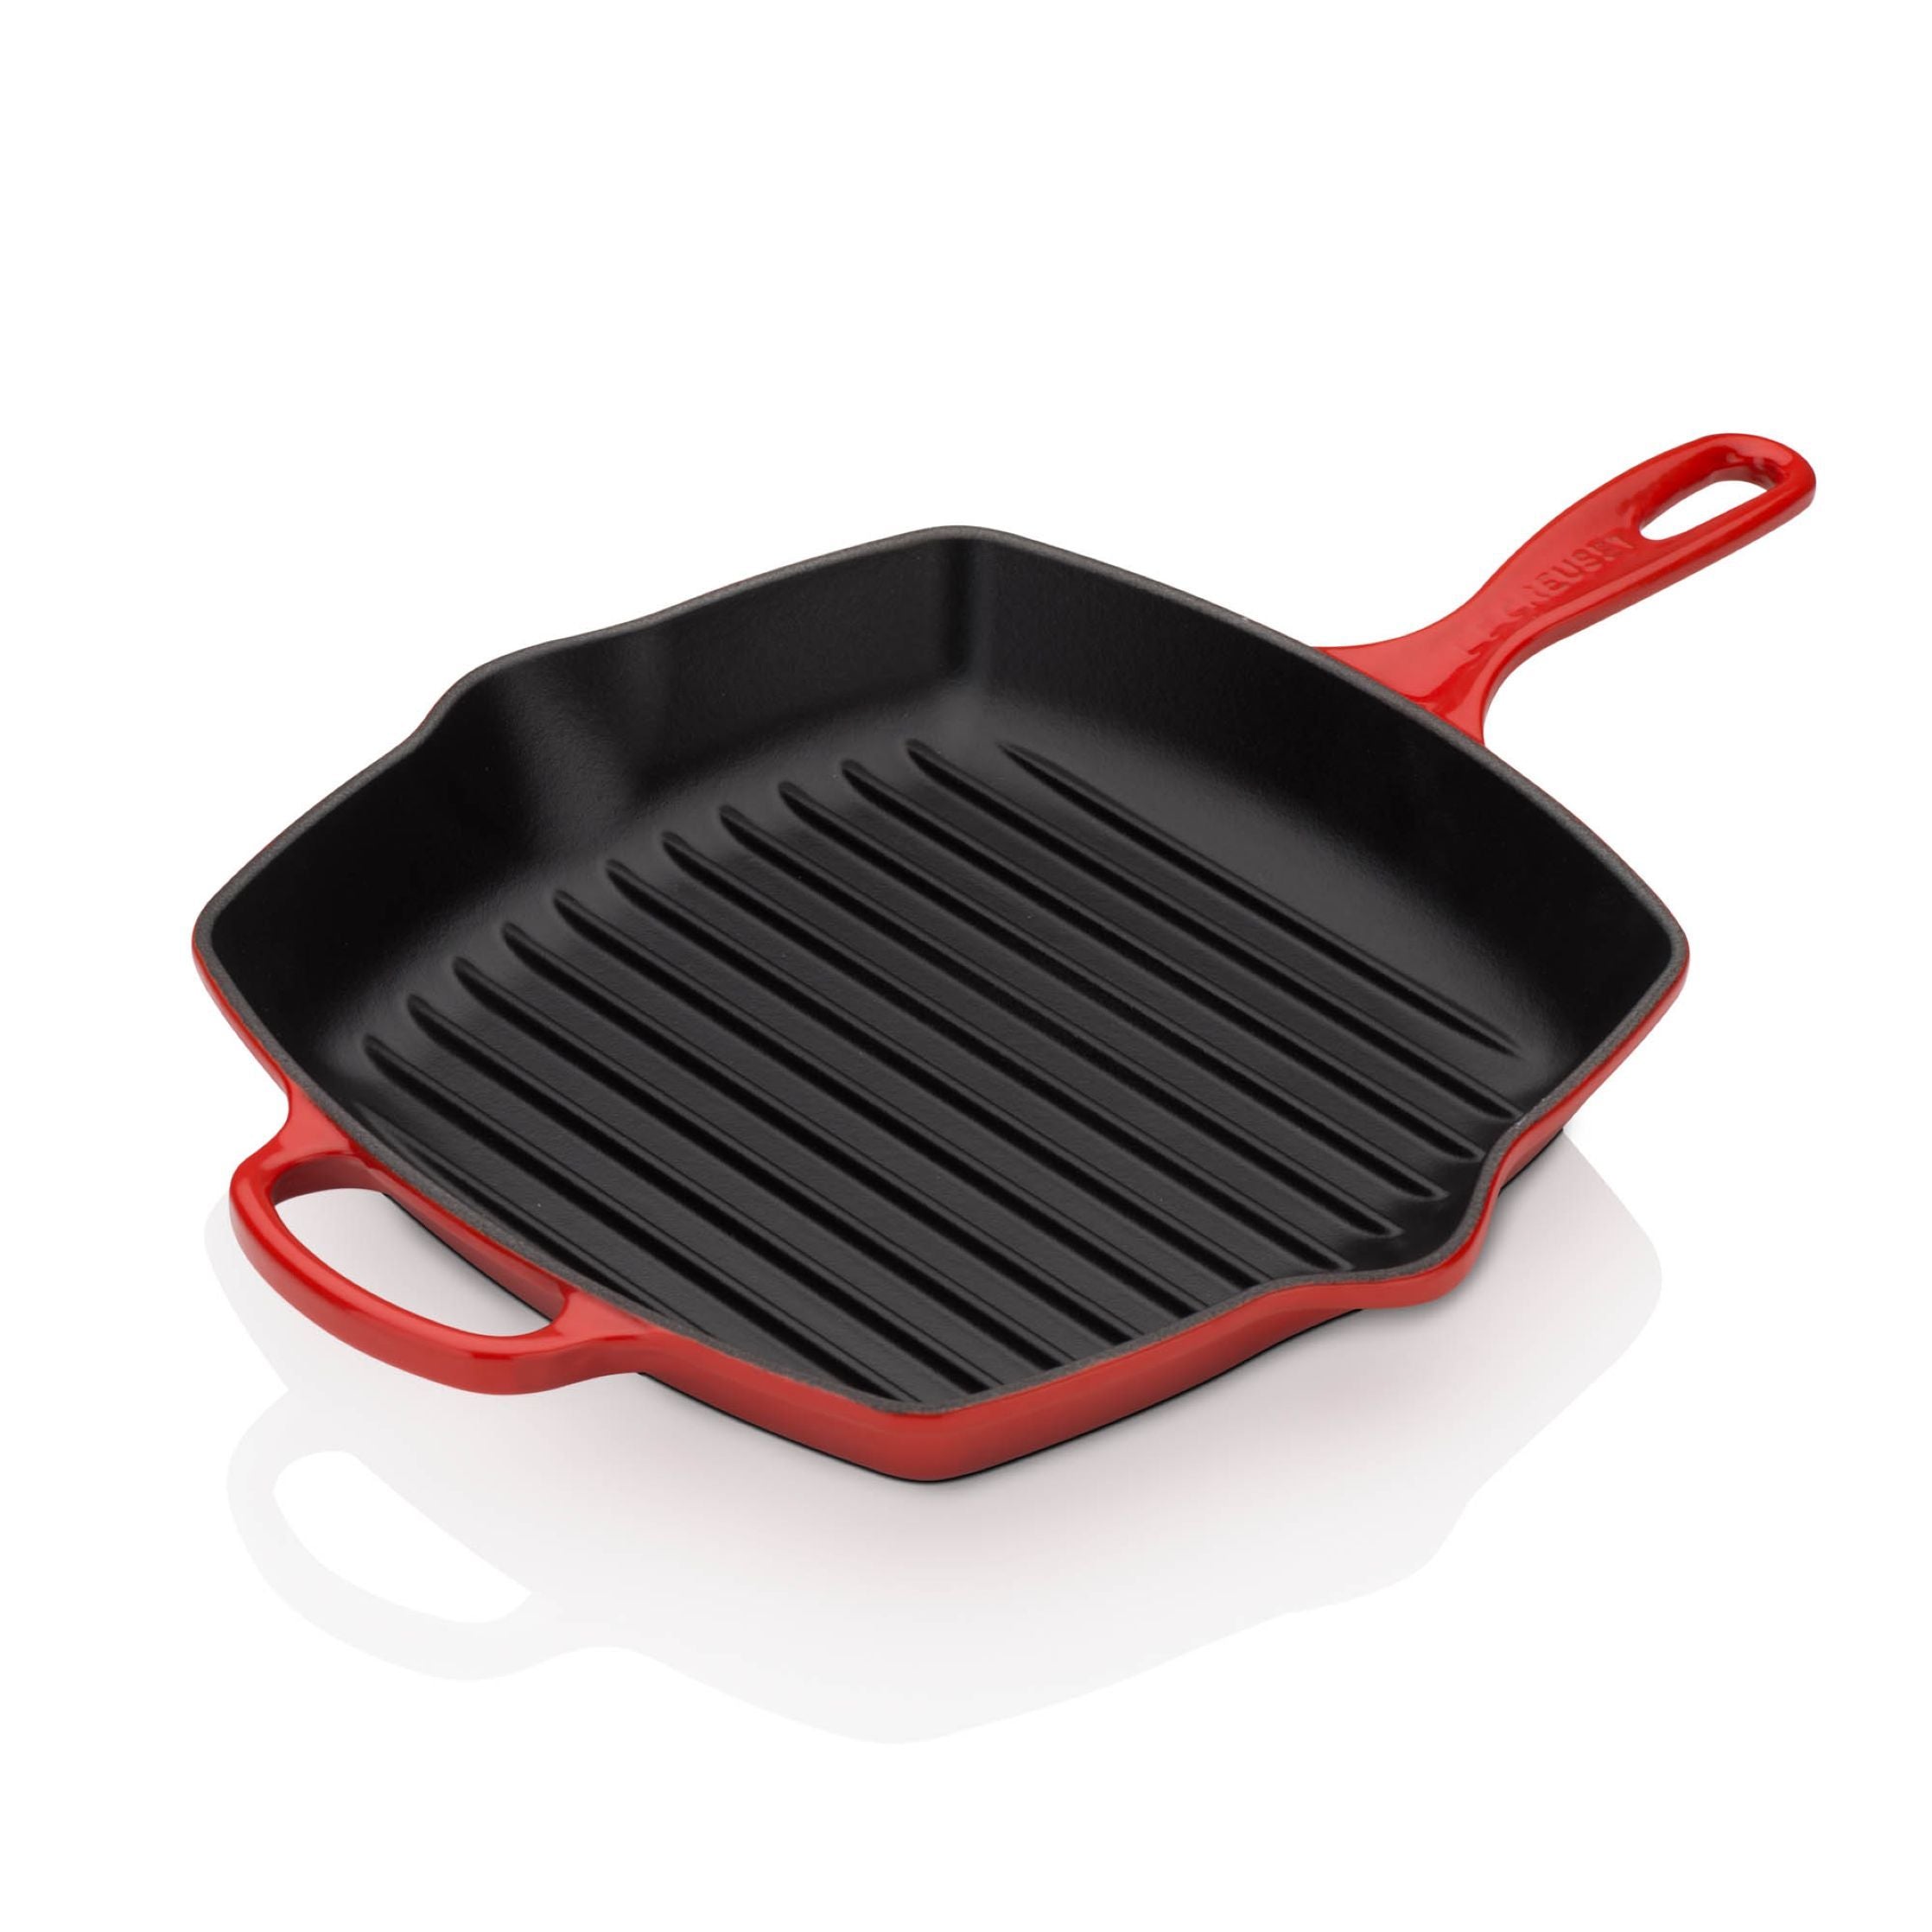 Le Creuset Signature Square Grill Pan 26 Cm, Cherry Red